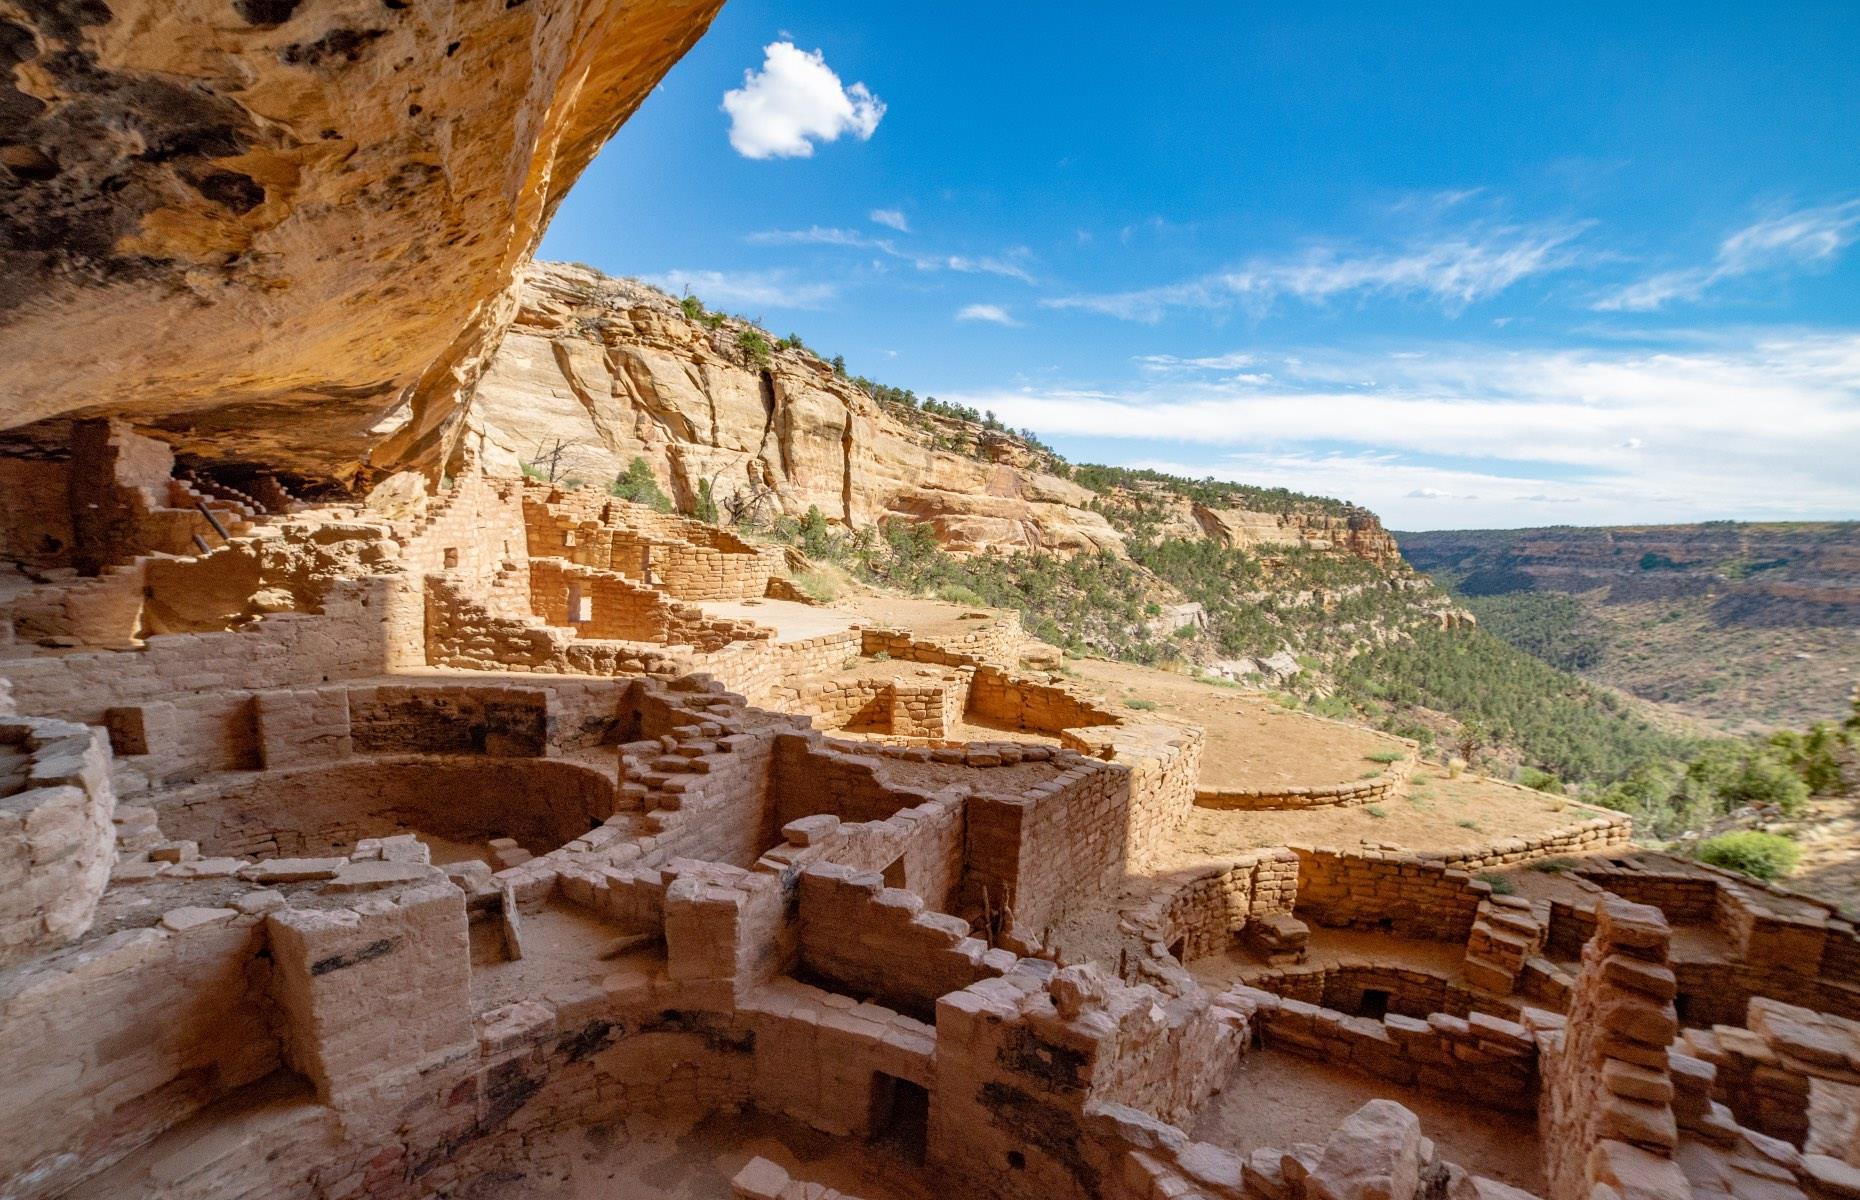 Mesa Verde National Park in Colorado is home to an ambitiously designed and well-preserved cliff civilization dating back to 550AD. This includes over 5,000 archaeological sites such as farming terraces, reservoirs, petroglyphs, and towers. It was discovered in the late 1800s by cowboys and today forms the largest archaeological preserve in the United States.  We delve into Mesa Verde's mysterious communities, from who built them to the homes you can visit today.